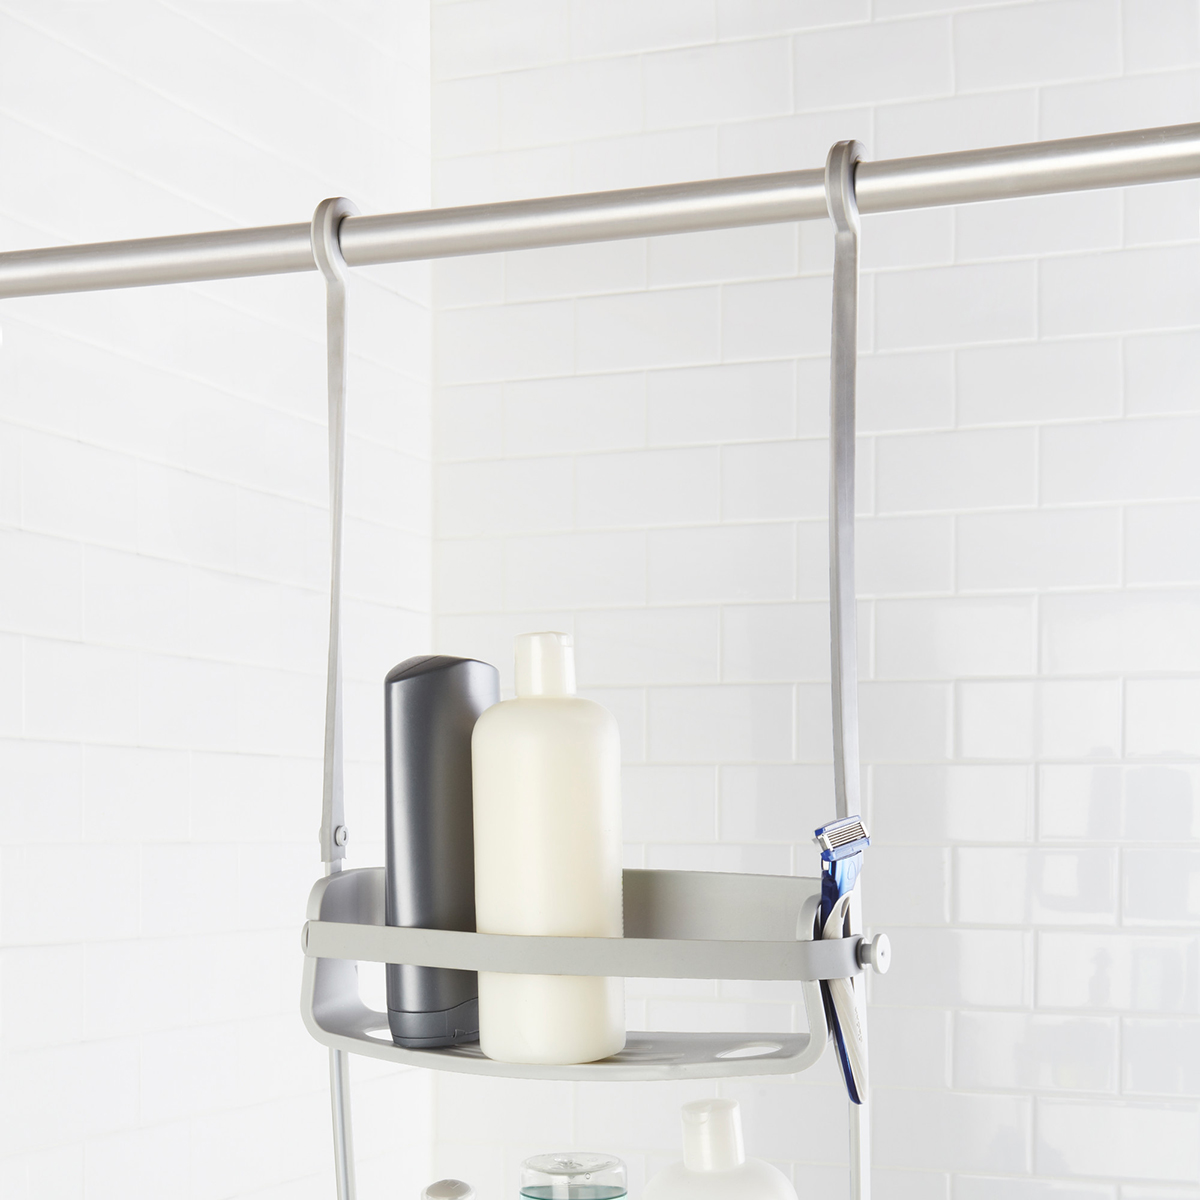 https://www.containerstore.com/catalogimages/405457/10069016-Umbra-Shower-Caddy-VEN8.jpg